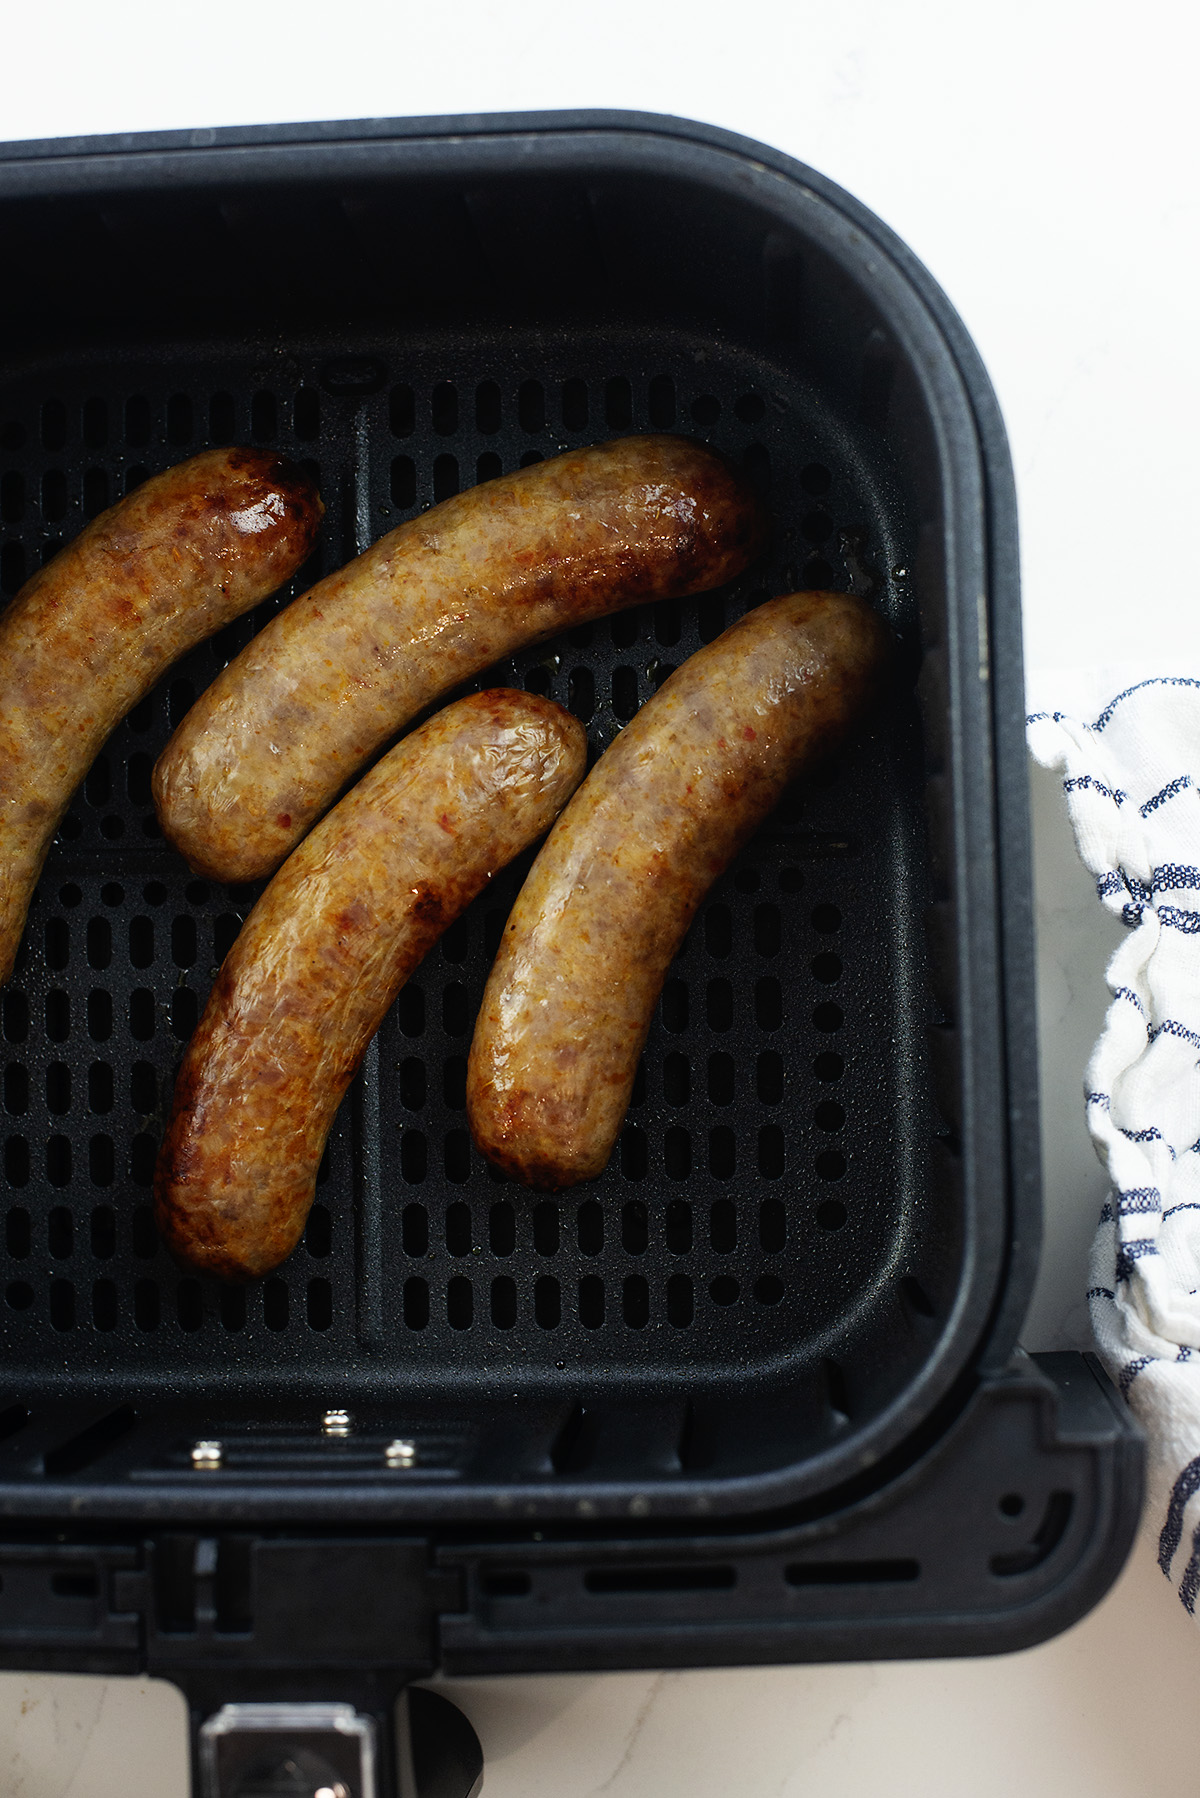 Four Italian sausages in an air fryer basket.